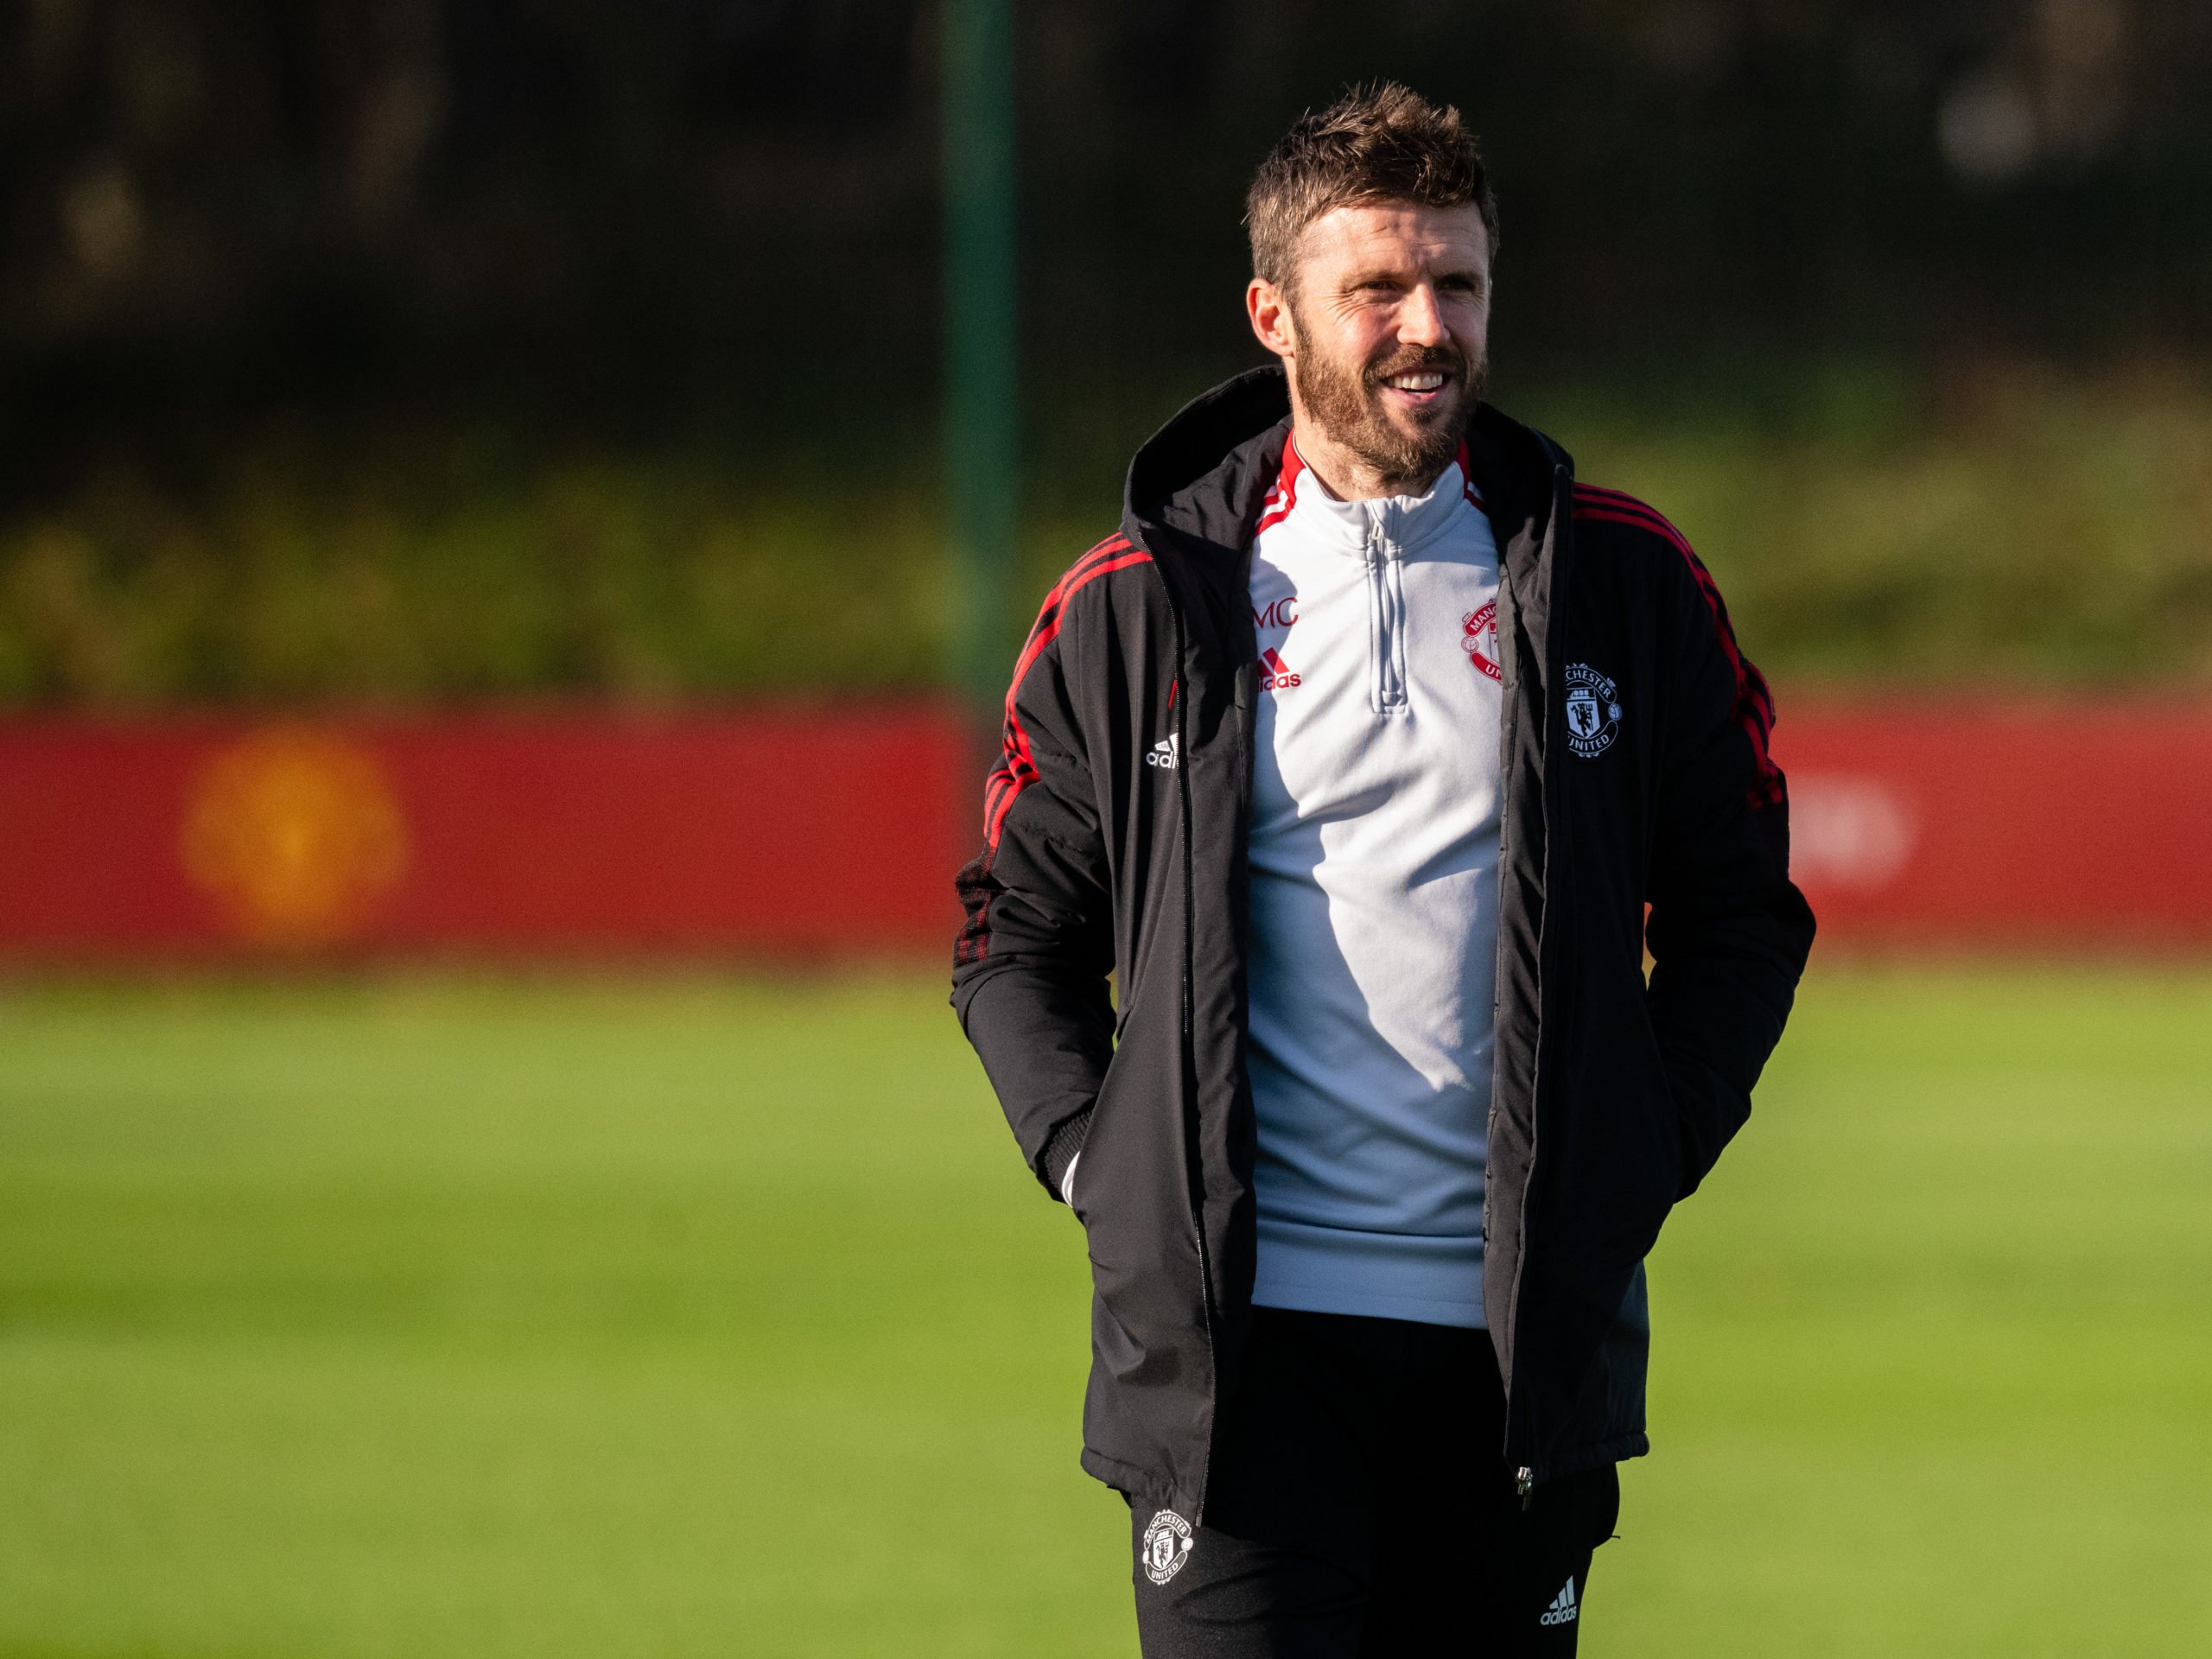 Carrick issues fitness update ahead of United's clash with Chelsea